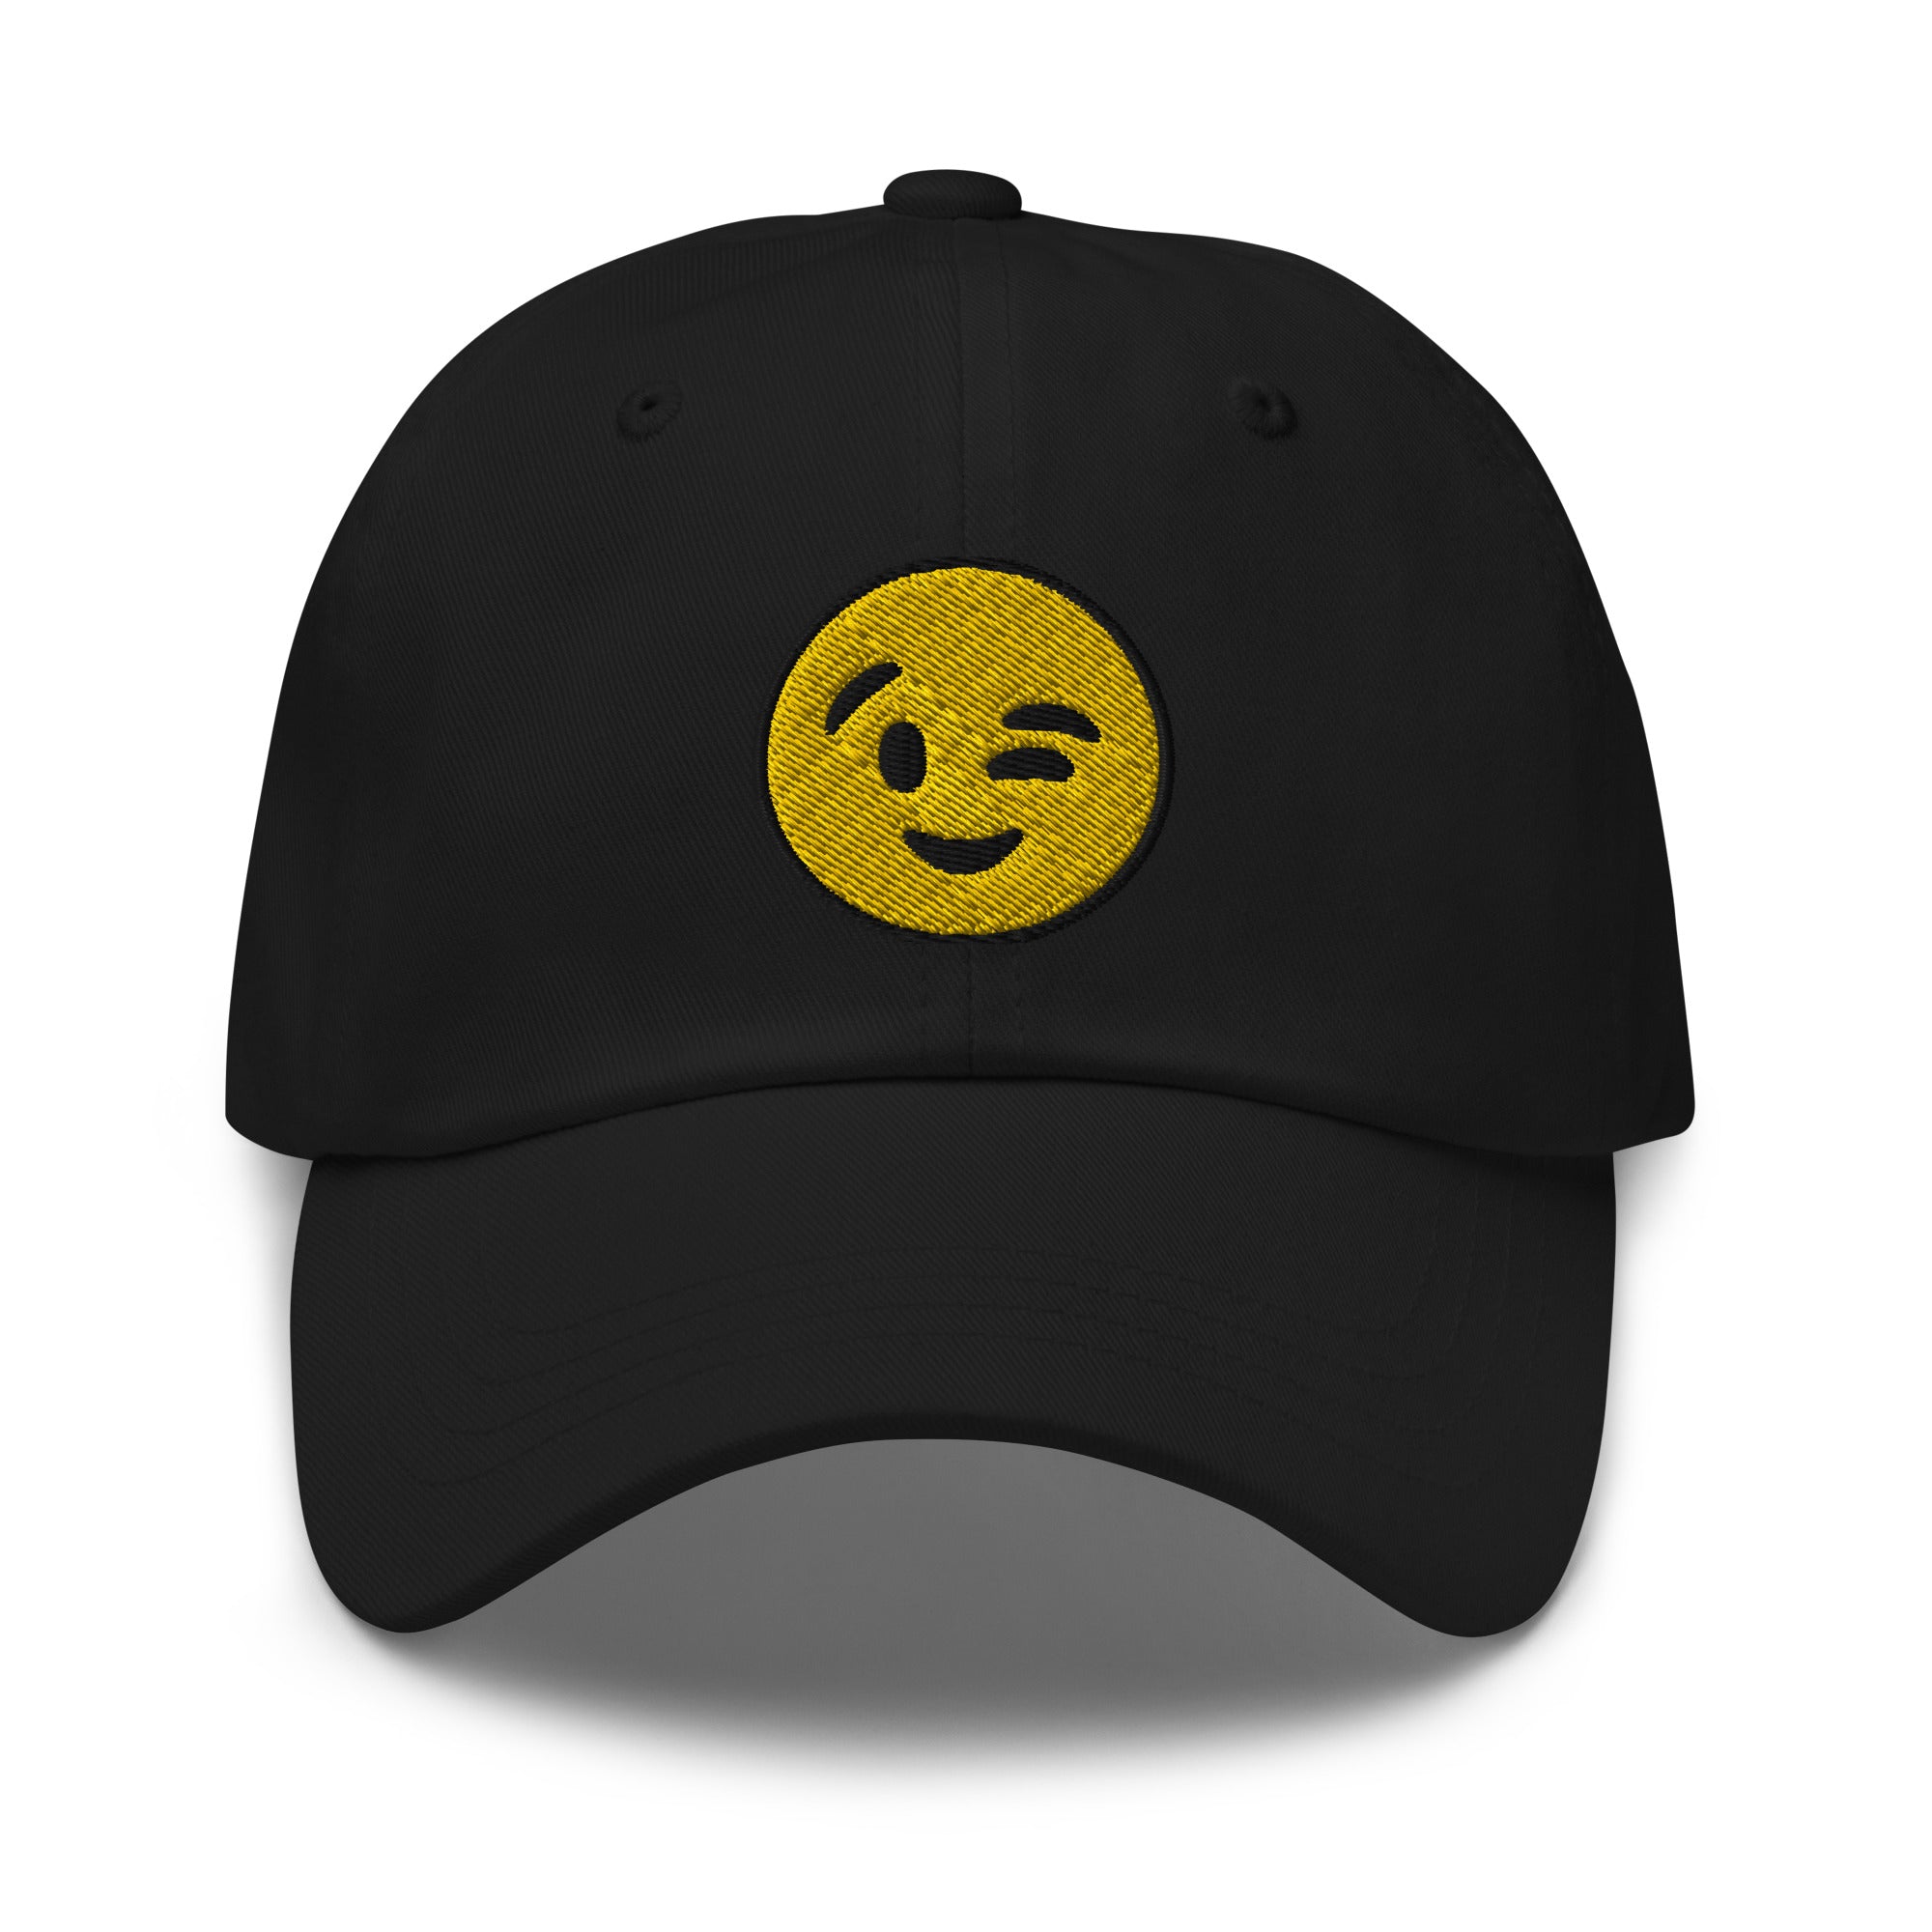 Winking Face Emoji Embroidered Baseball Cap Wink Emoticon Dad hat - Edge of Life Designs